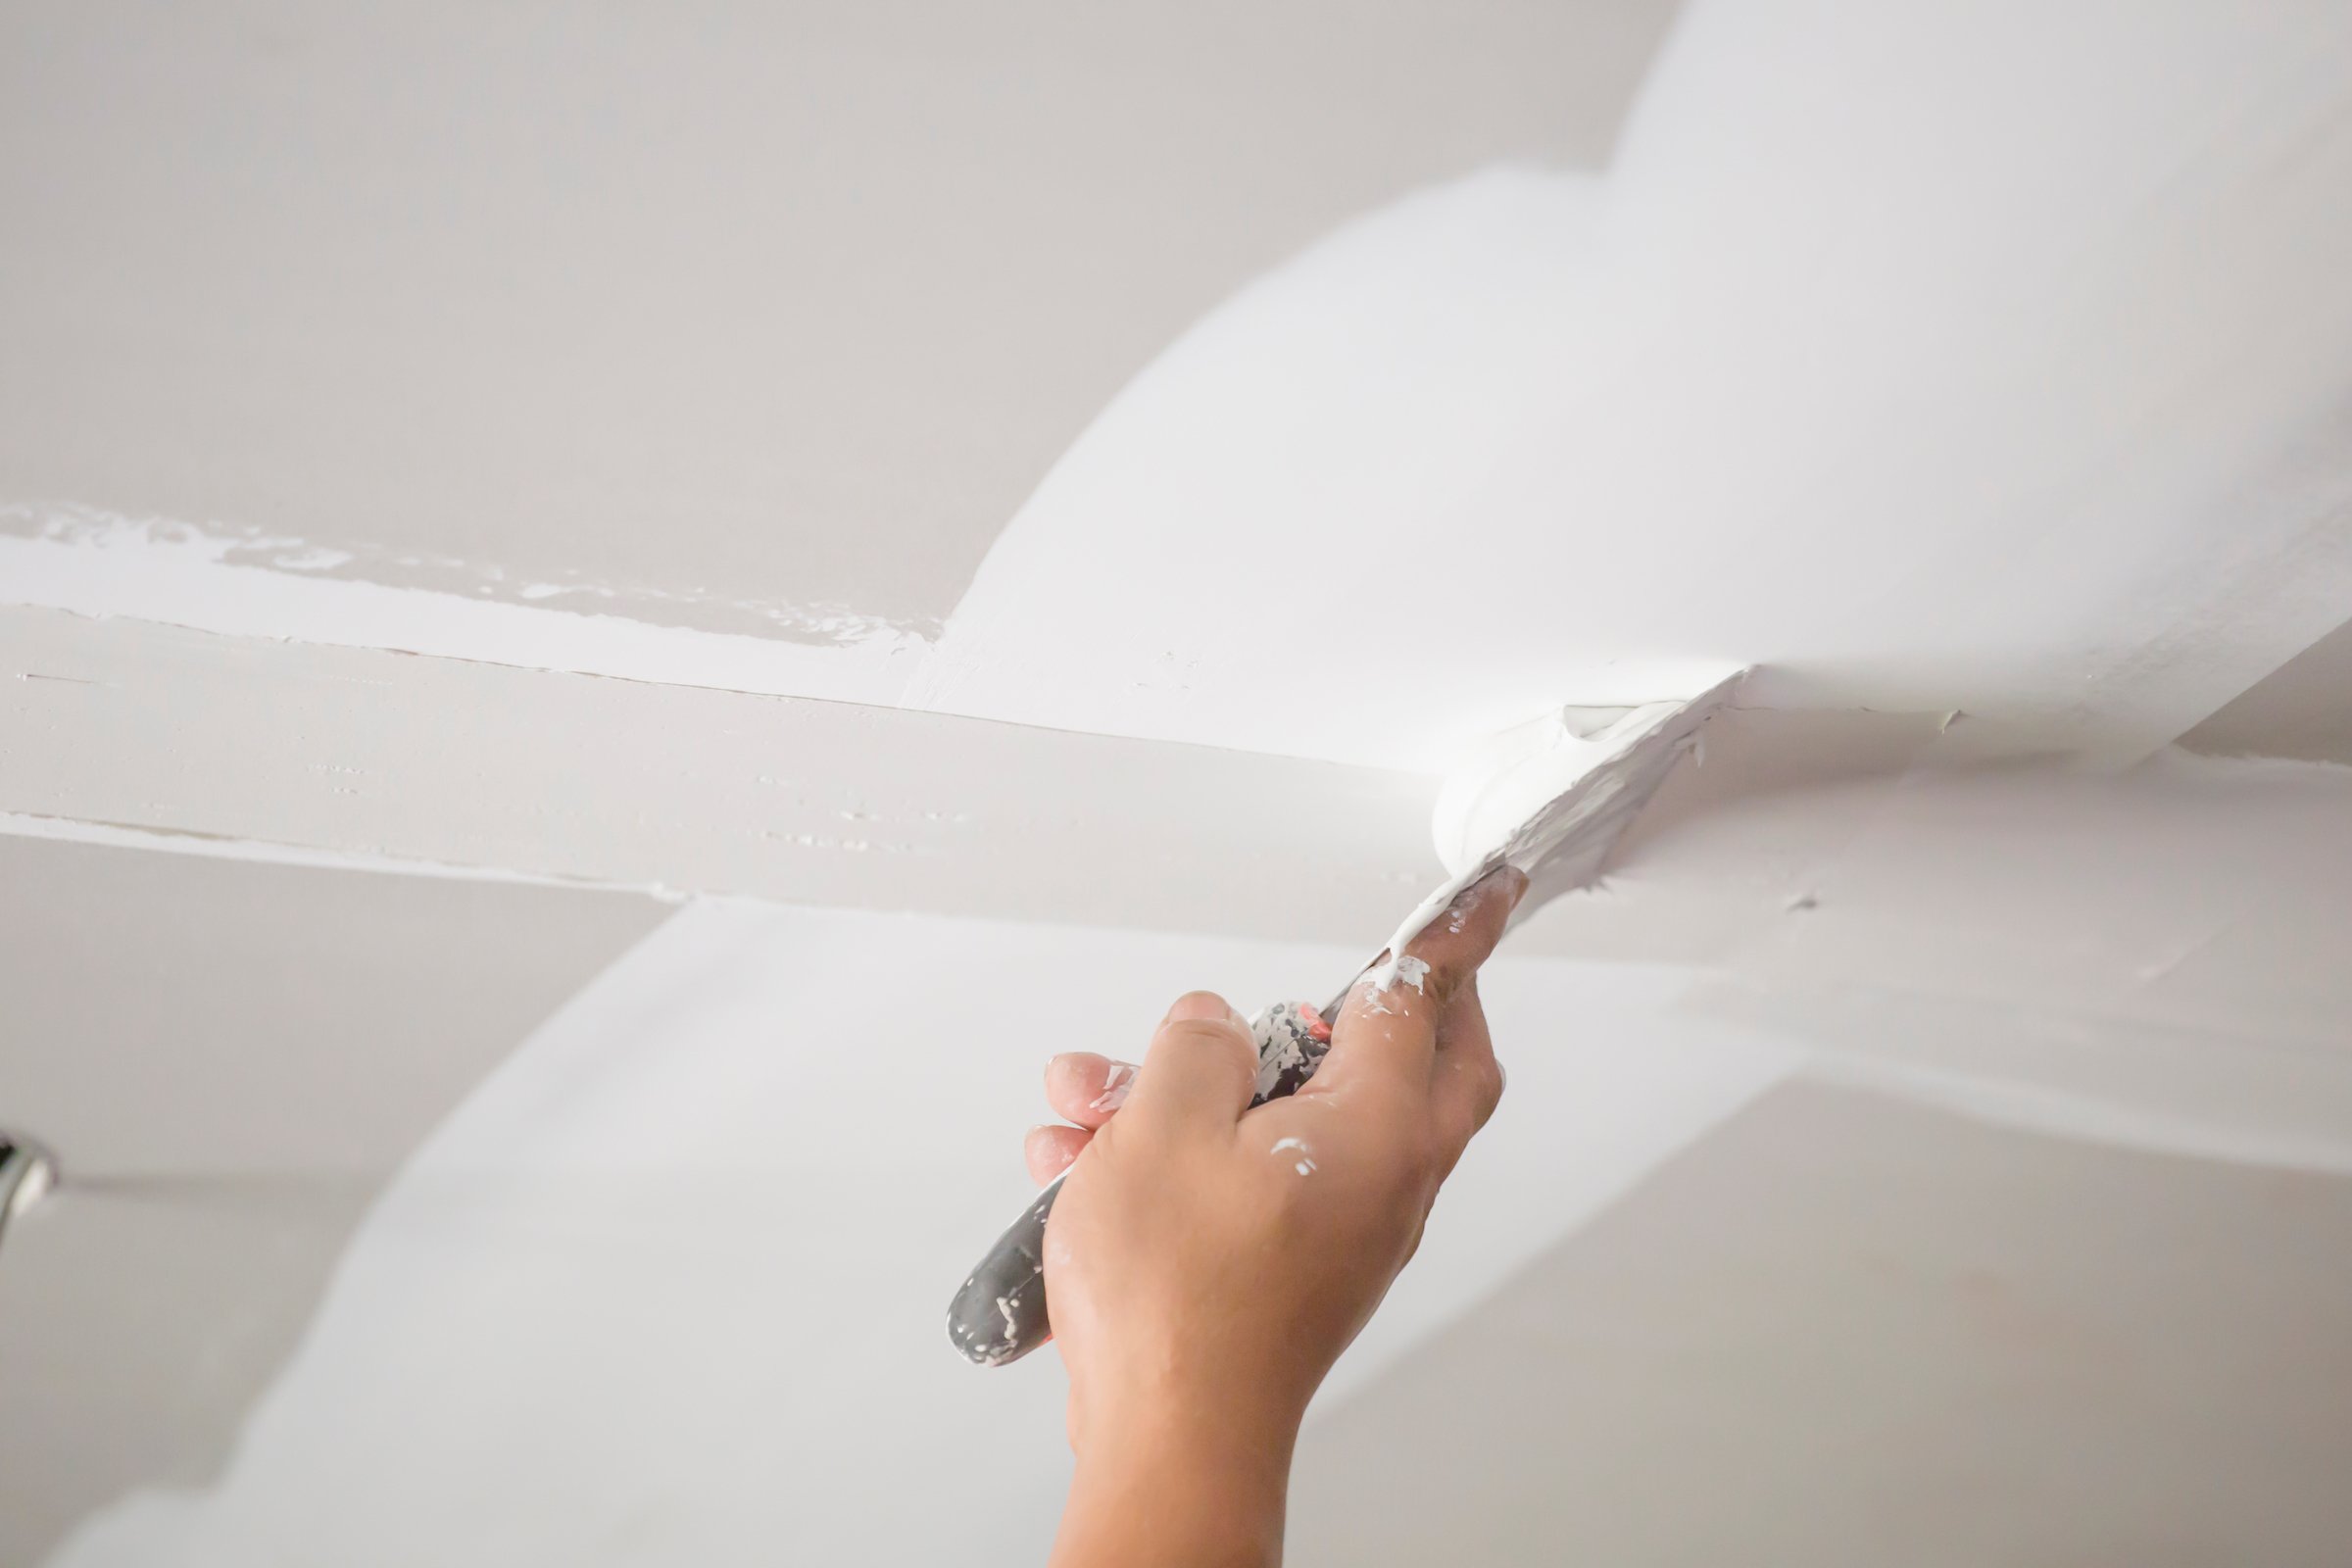 Drywall repair cost: there are some drywall repairs you can do yourself. 